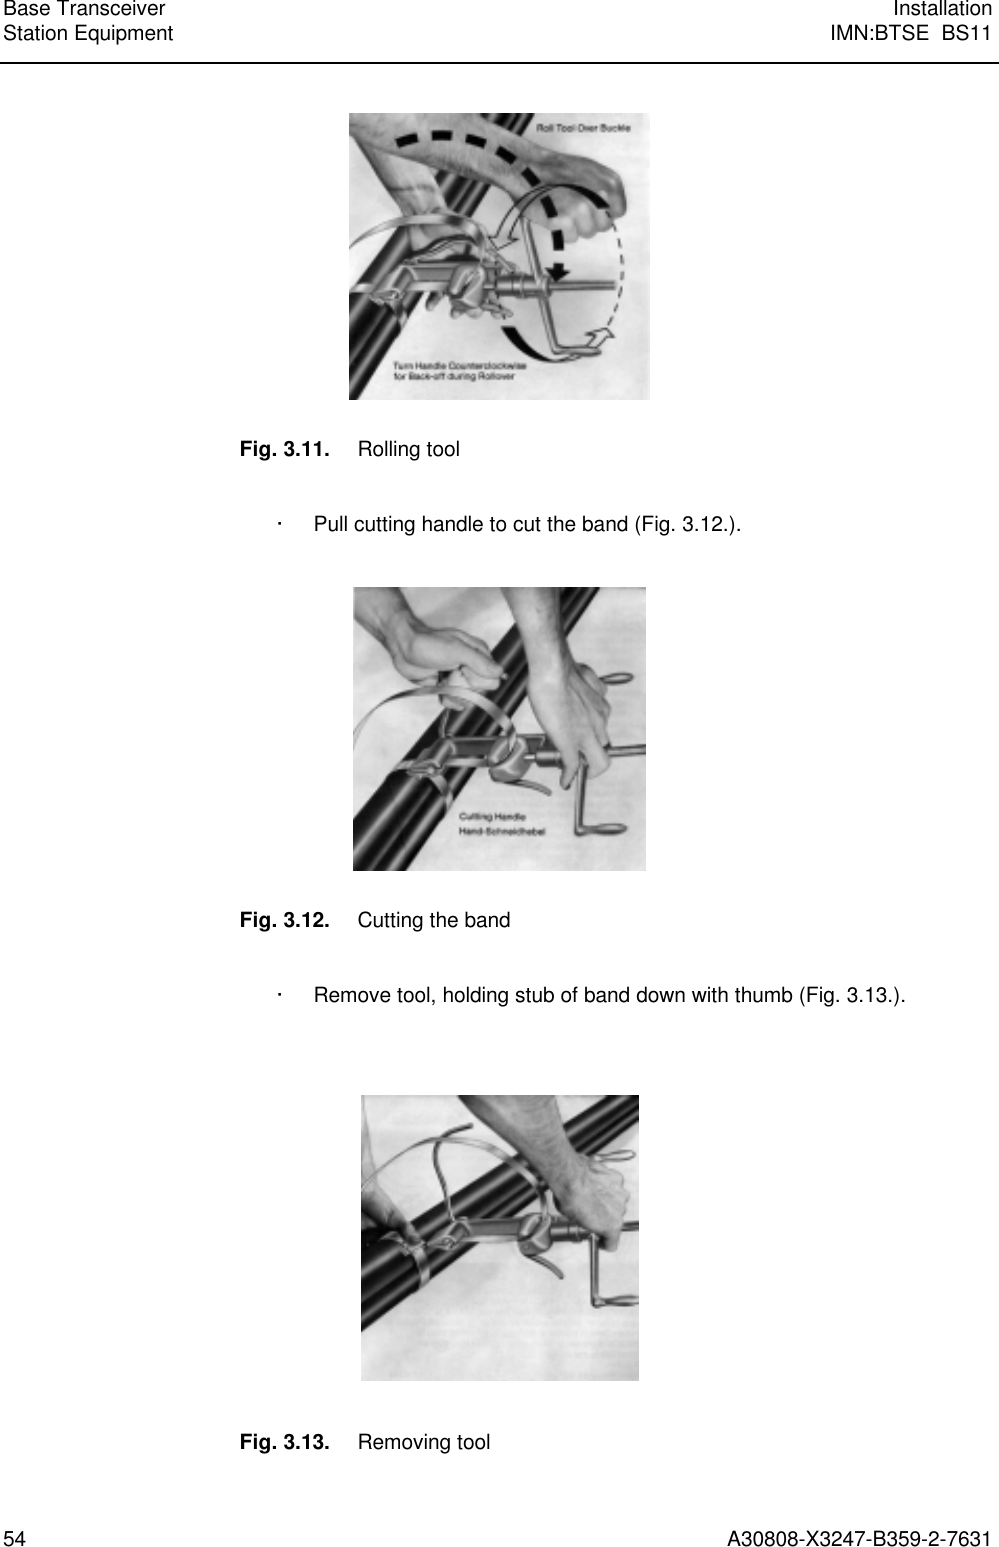  Base Transceiver InstallationStation Equipment IMN:BTSE  BS1154 A30808-X3247-B359-2-7631Fig. 3.11. Rolling tool· Pull cutting handle to cut the band (Fig. 3.12.).Fig. 3.12. Cutting the band· Remove tool, holding stub of band down with thumb (Fig. 3.13.).Fig. 3.13. Removing tool